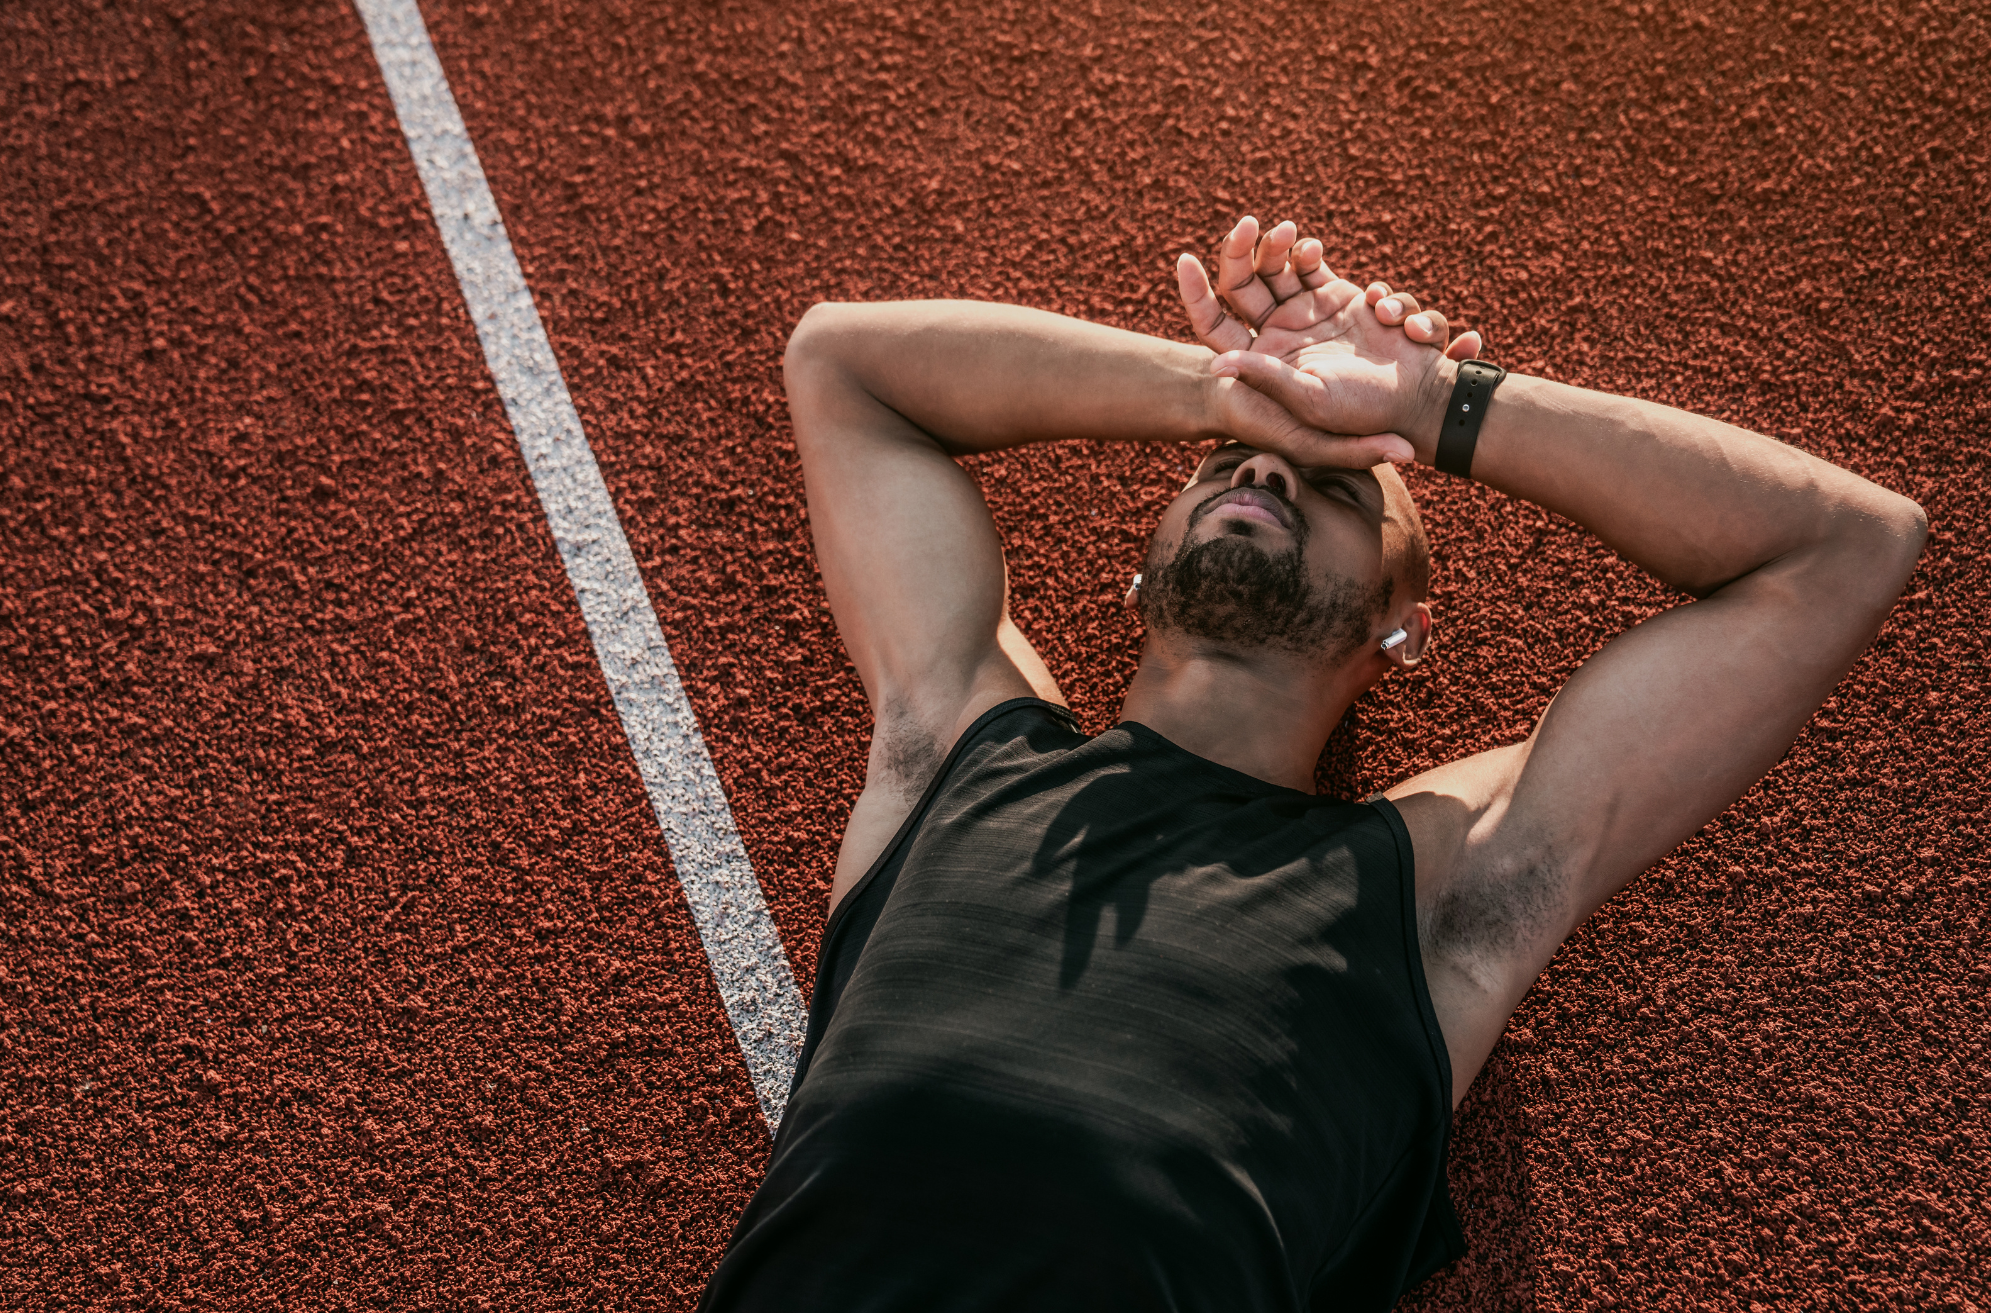 How You Can Avoid The Sports Injury That Always Seems To Plague Your Season